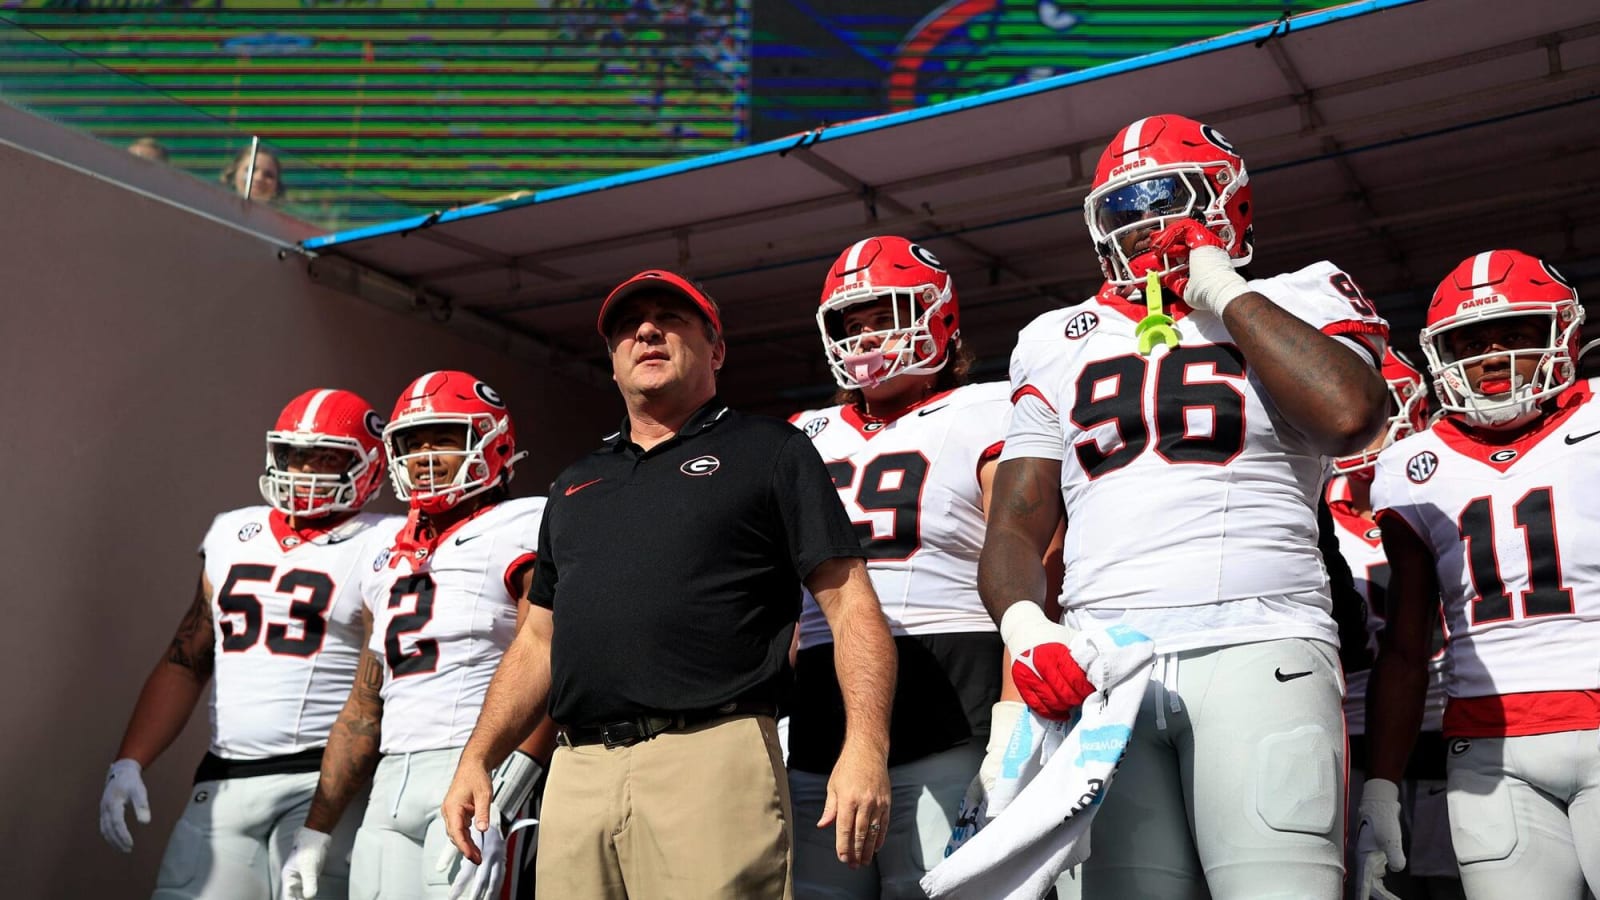 CFP national championship odds: If not the Bulldogs, then who?